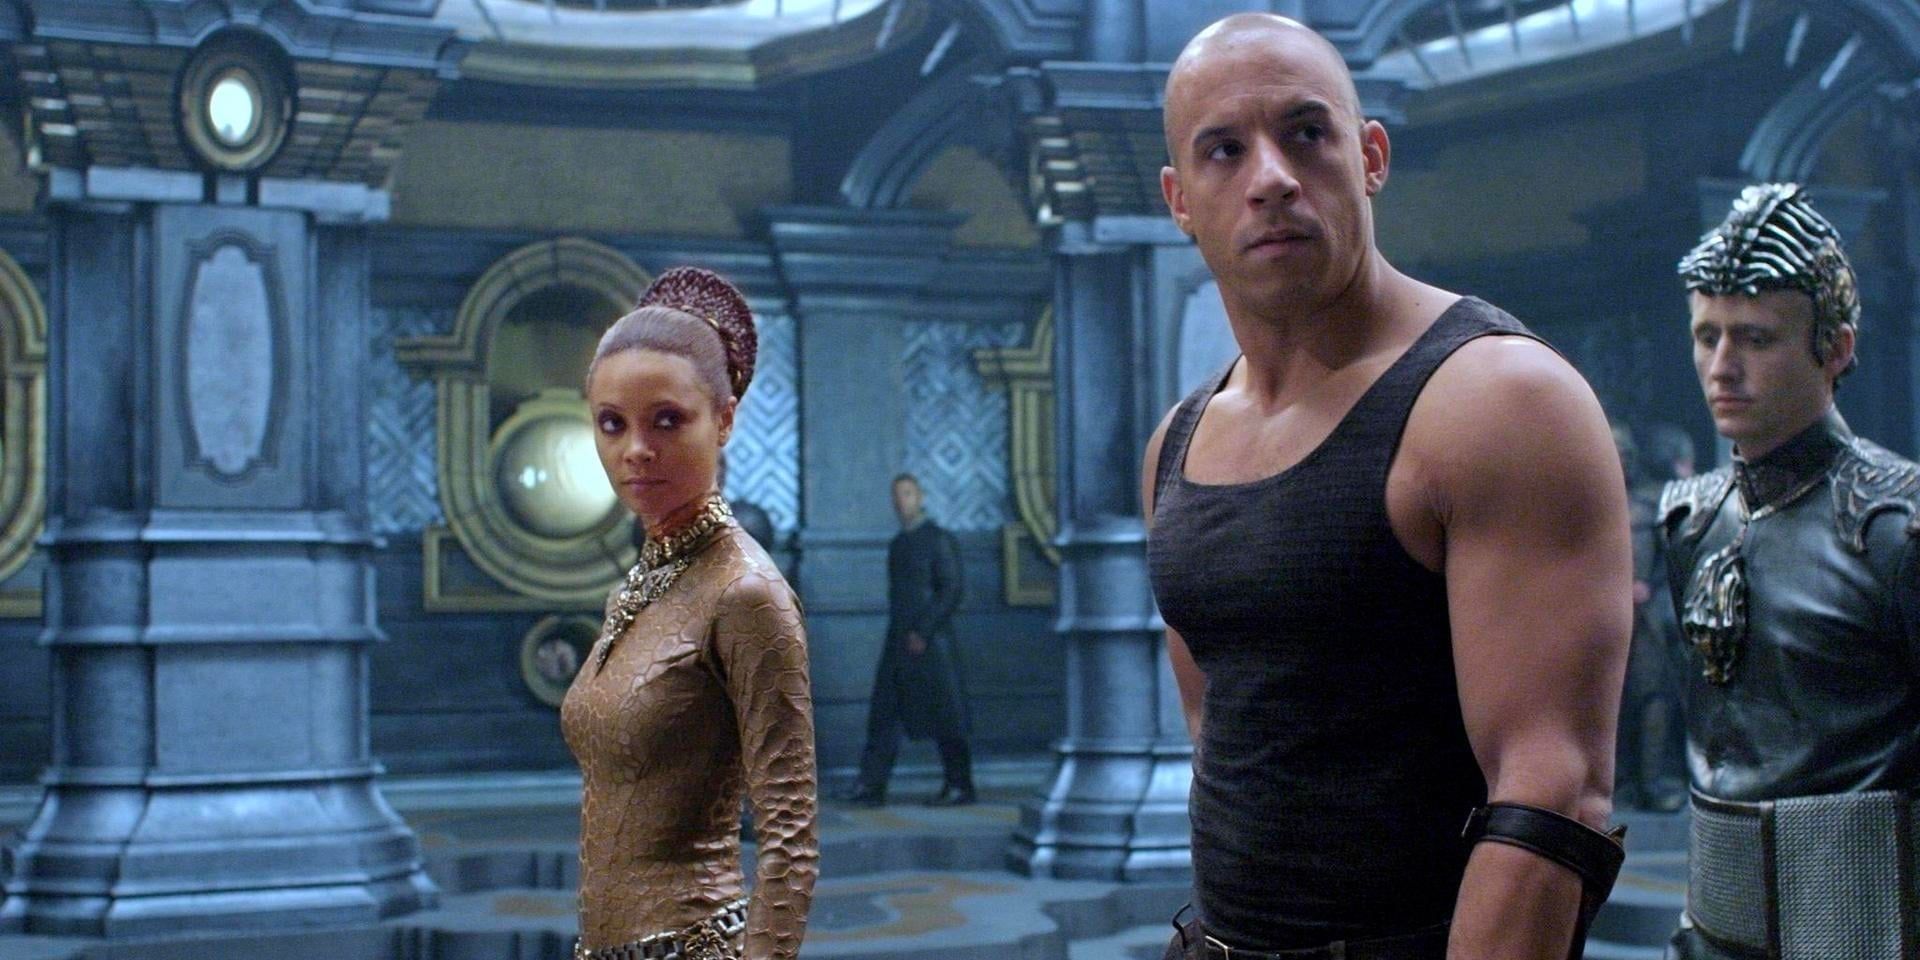 Riddick stands in the halls of a sci-fi vessel in 'The Chronicles of Riddick'.